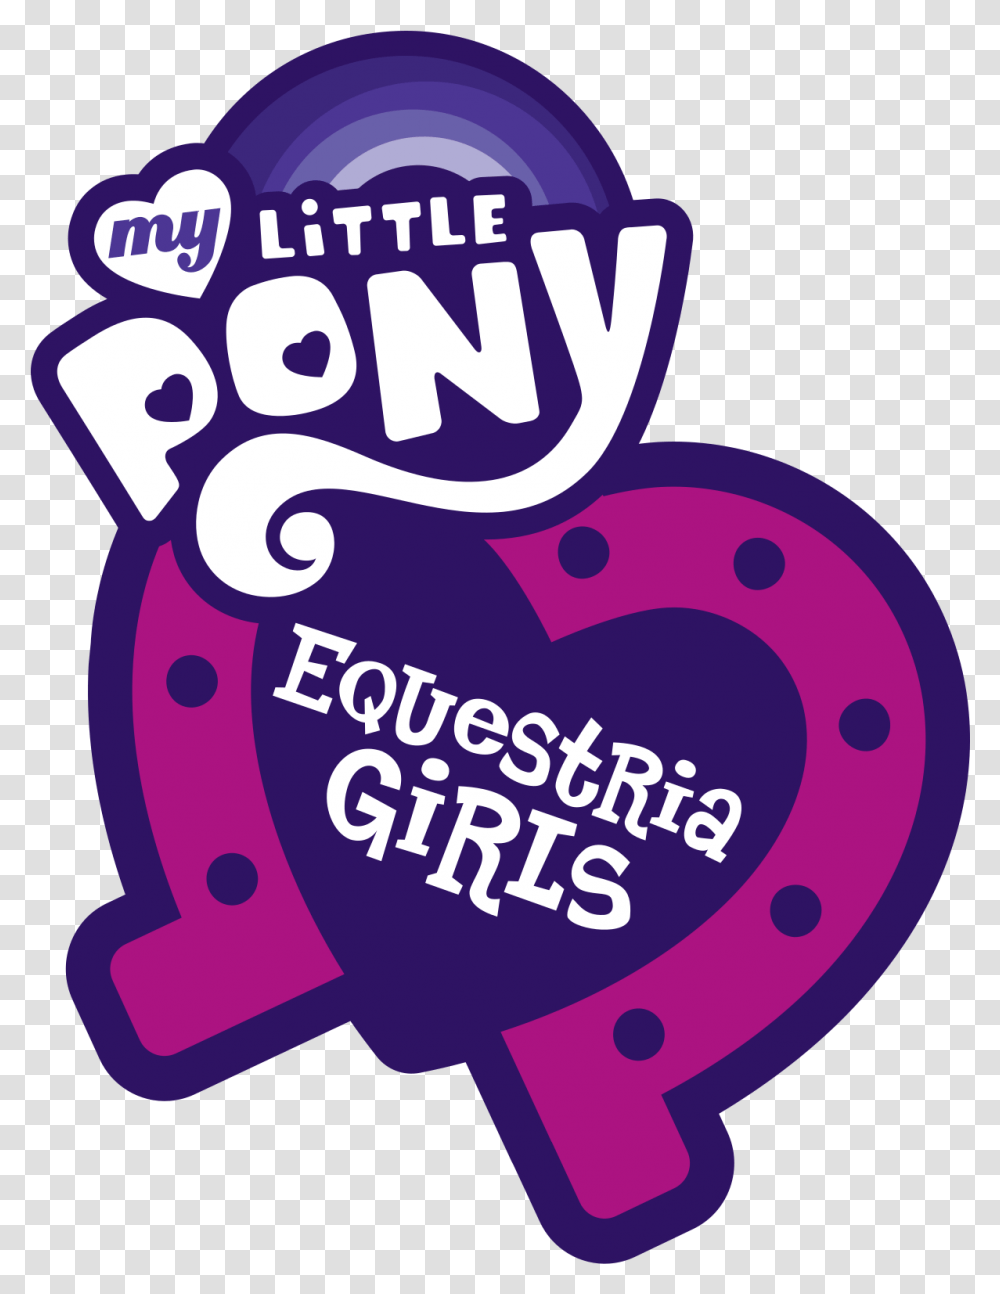 My Little Pony Equestria Girls Wikipedia, Poster, Advertisement, Flyer, Paper Transparent Png